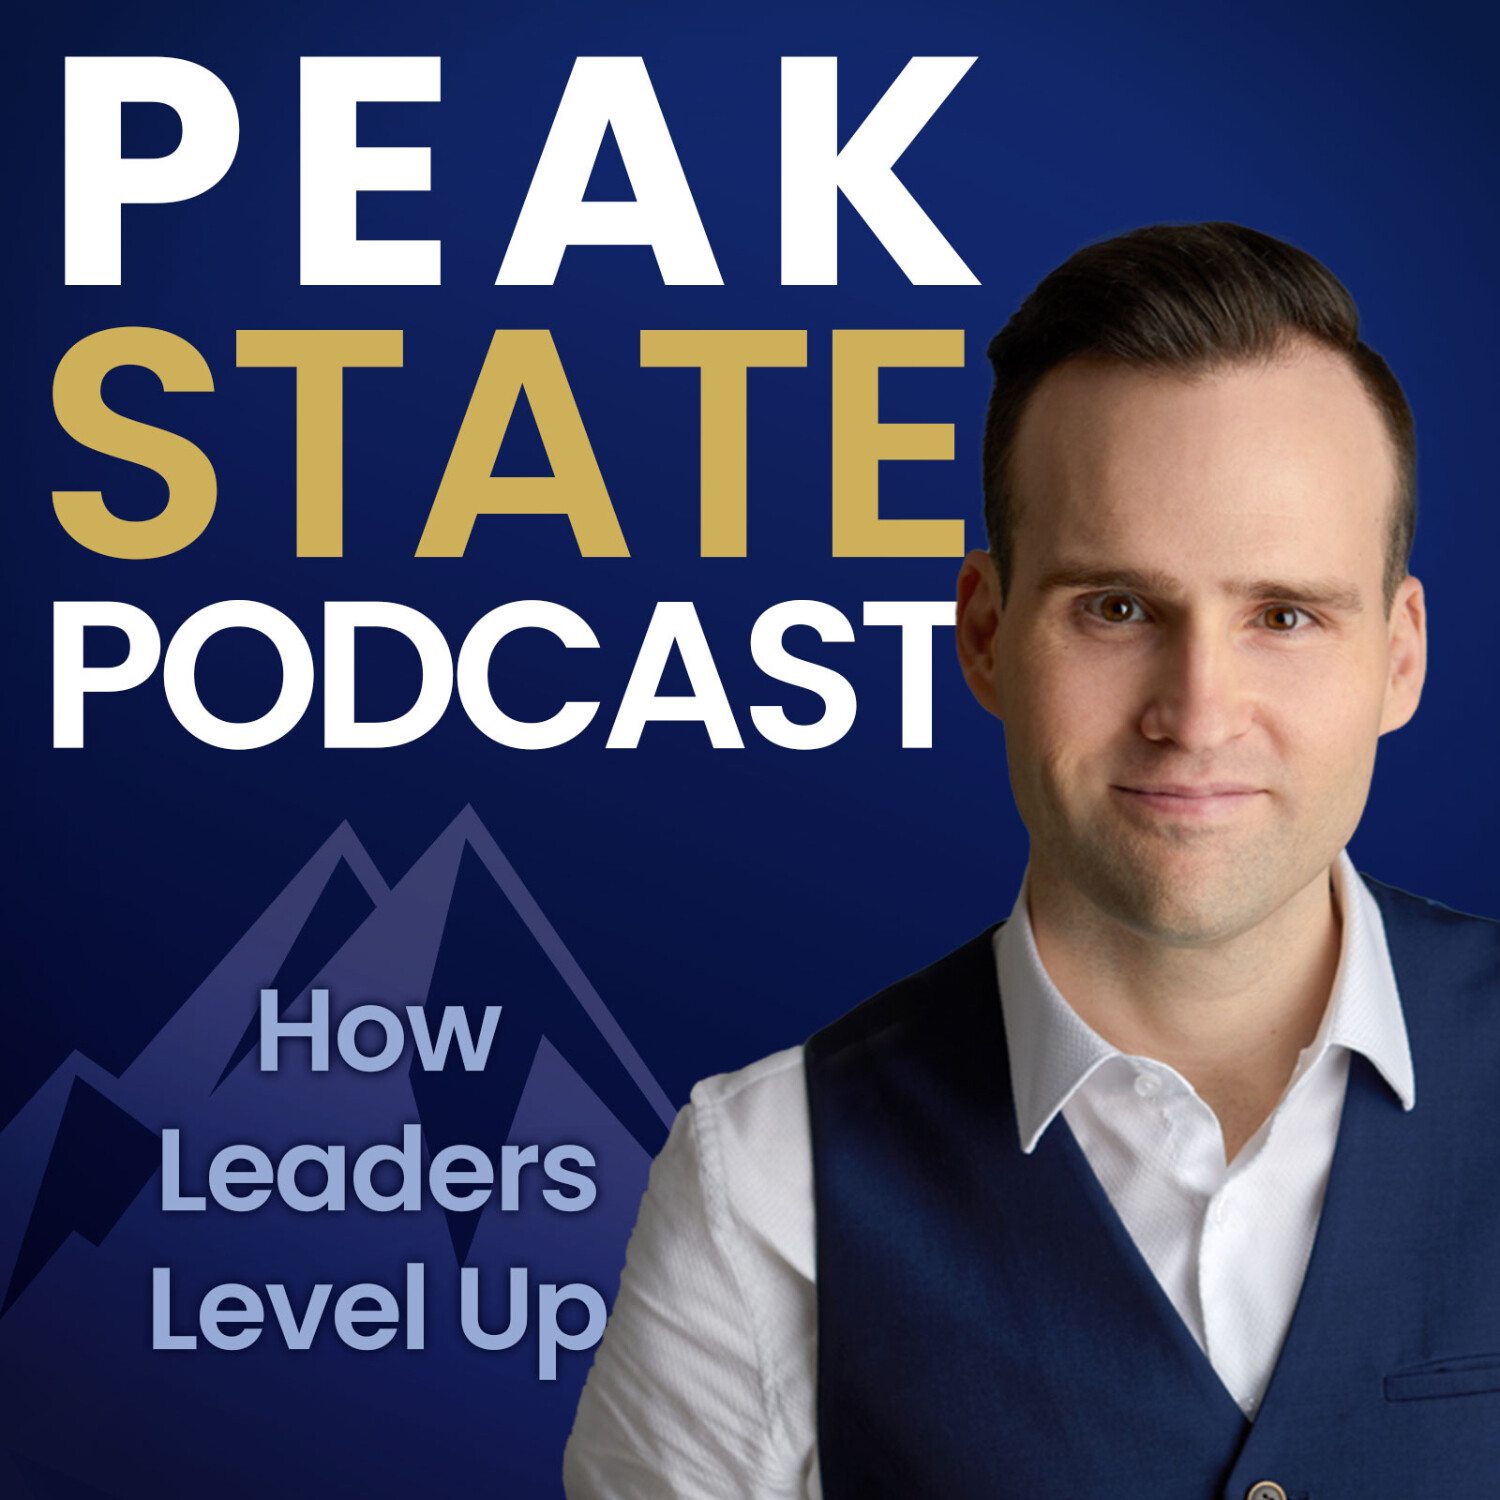 Peak State Podcast: How Leaders Level Up